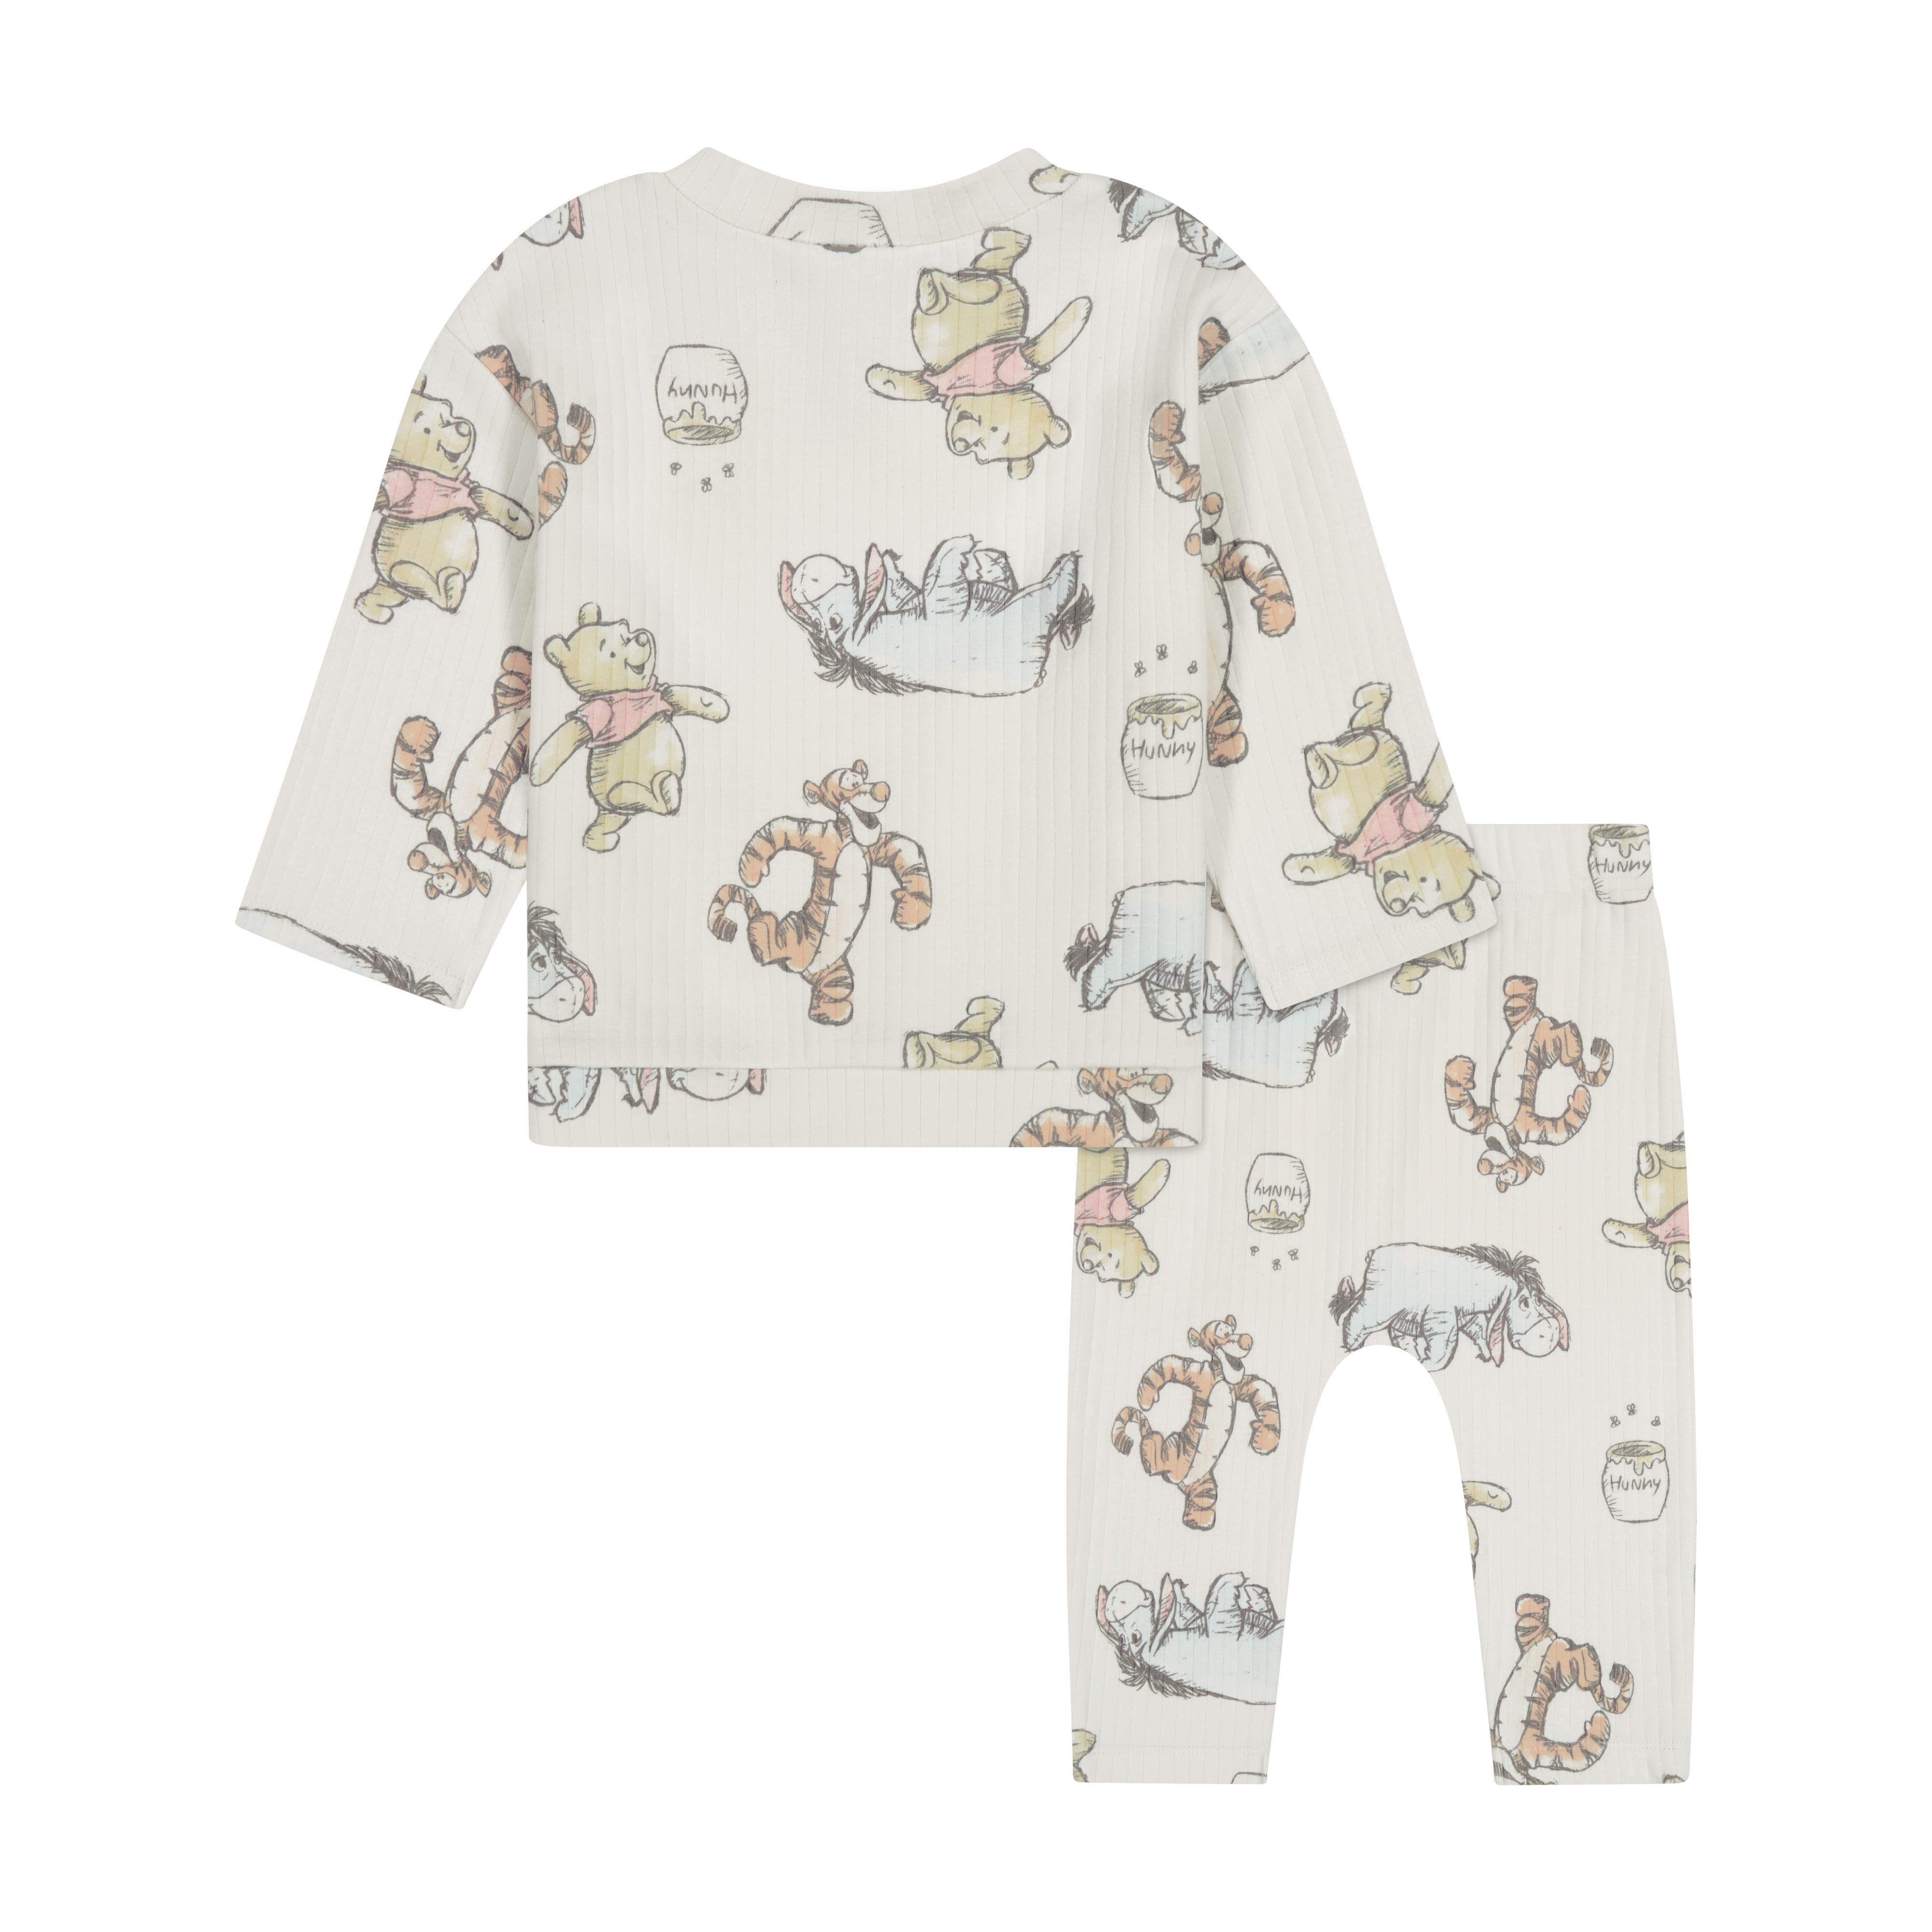 Winnie the Pooh Baby Boy 2 Piece Pant Set, Sizes 0/3 Months-24 Months - image 5 of 8